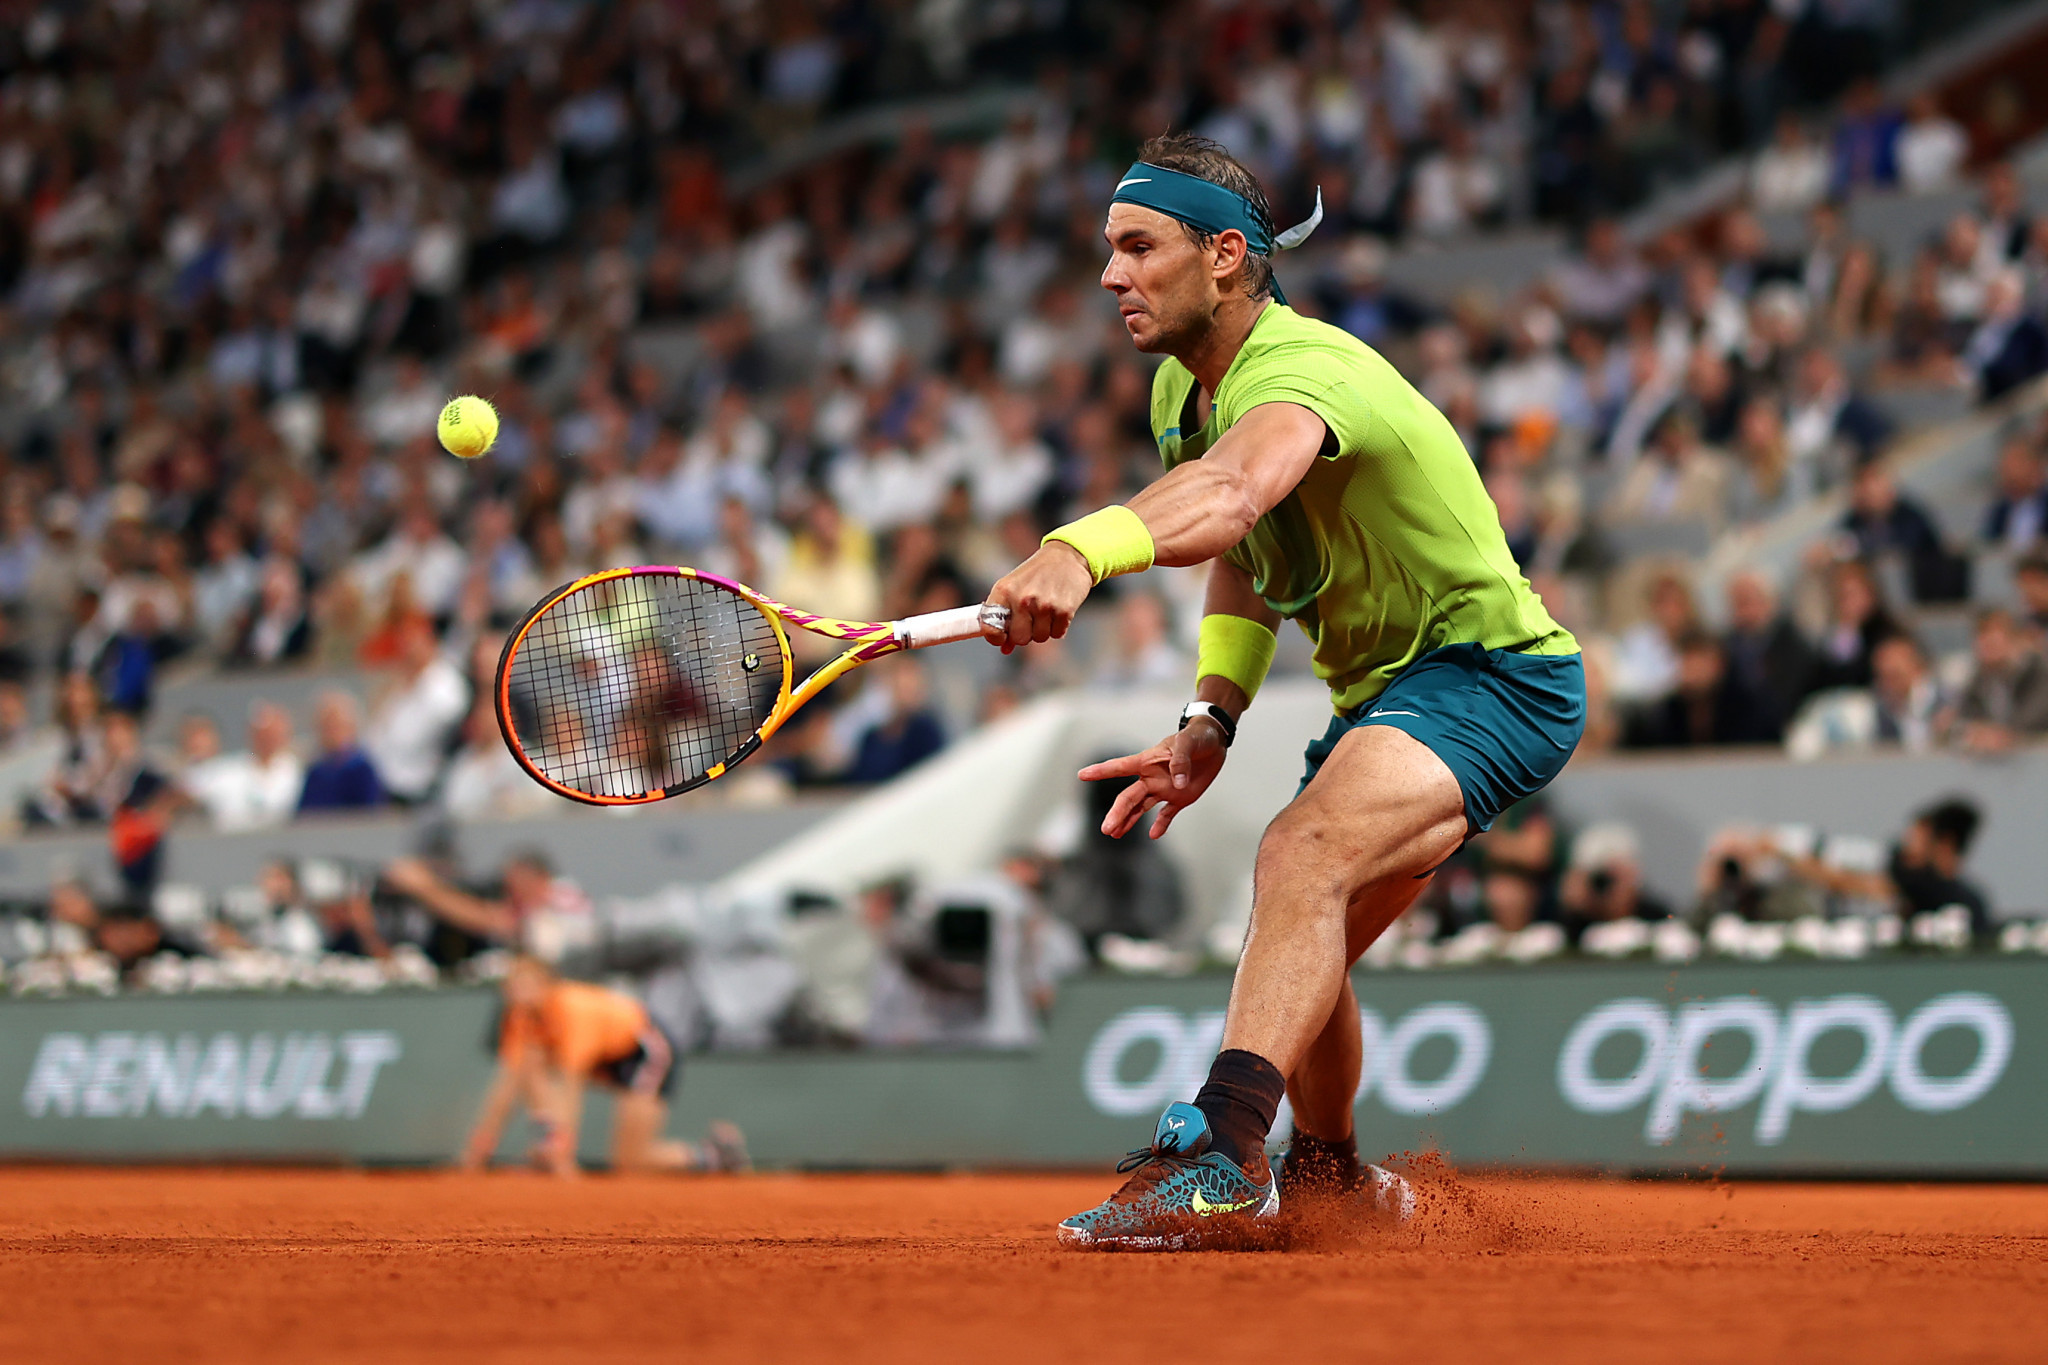 Nadal faces Ruud challenge in quest for 14th French Open crown